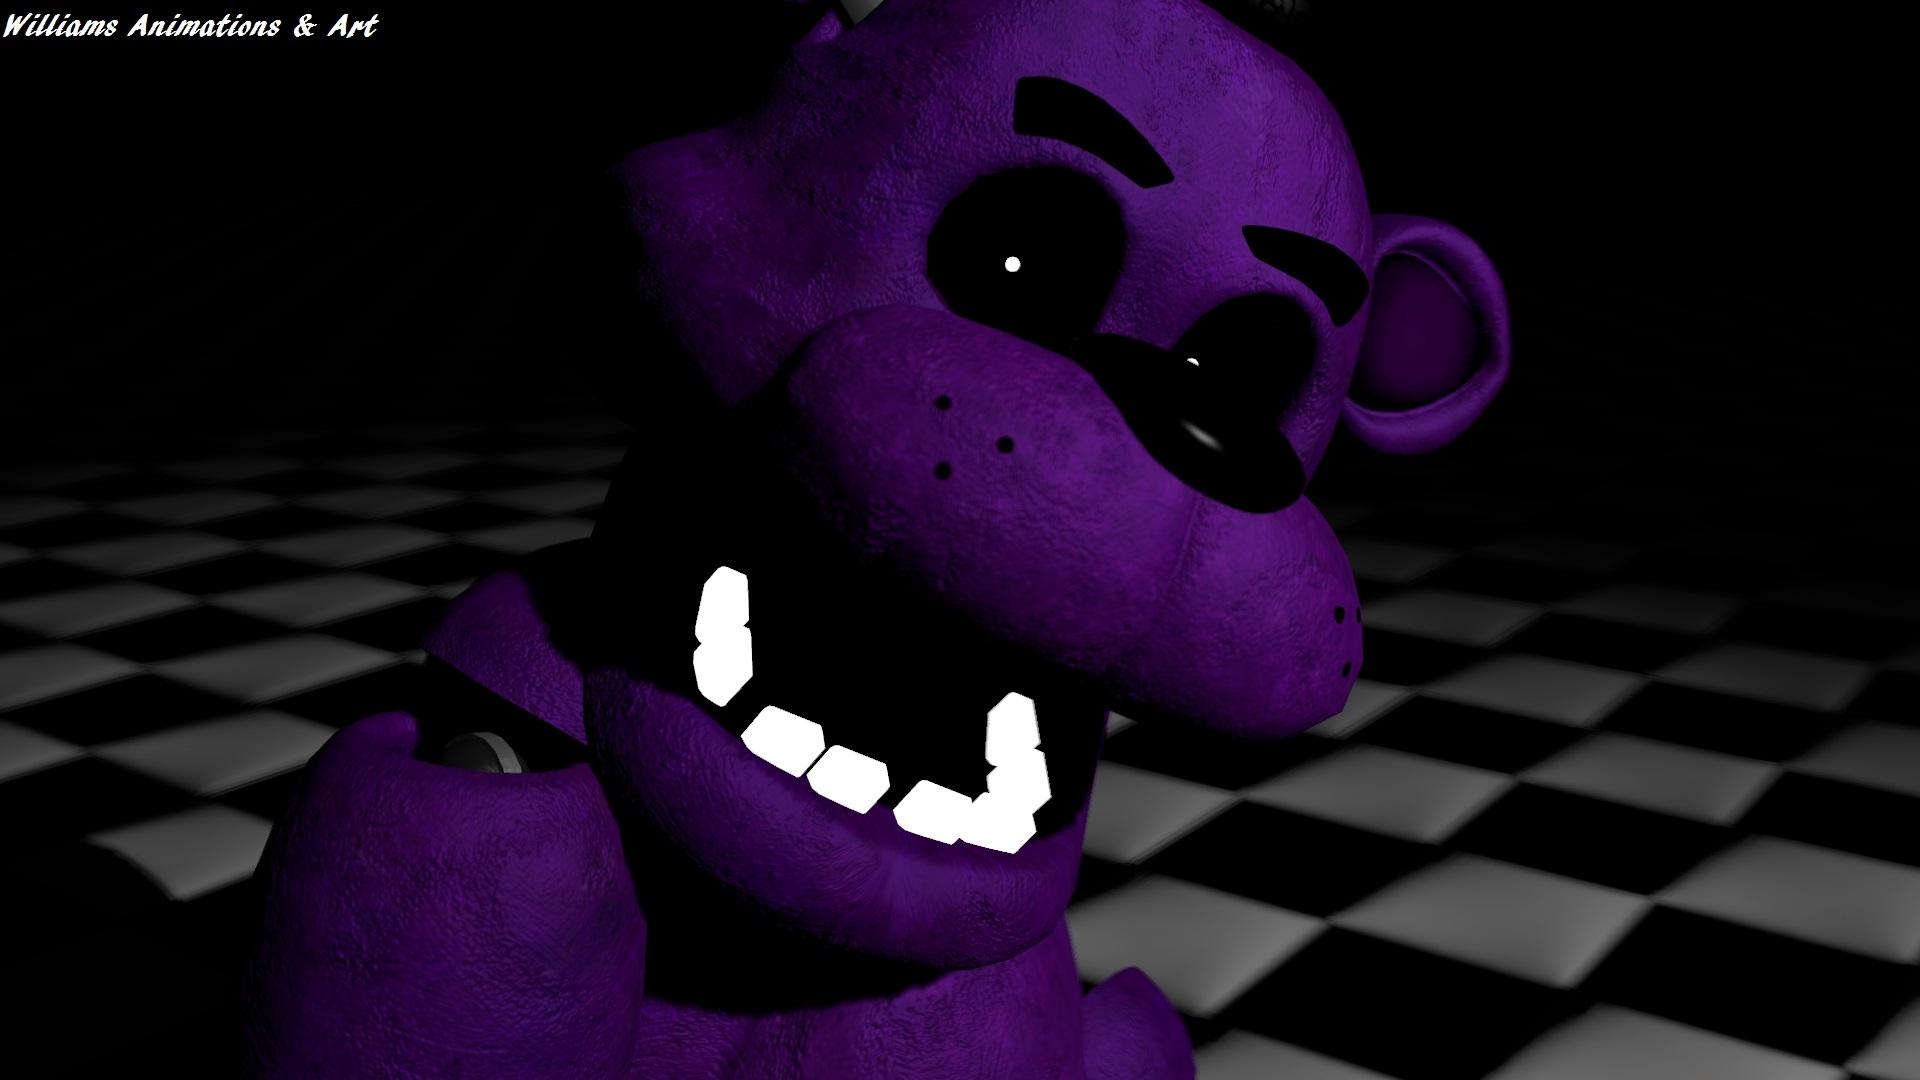 Here is just a random Shadow Freddy render I made.